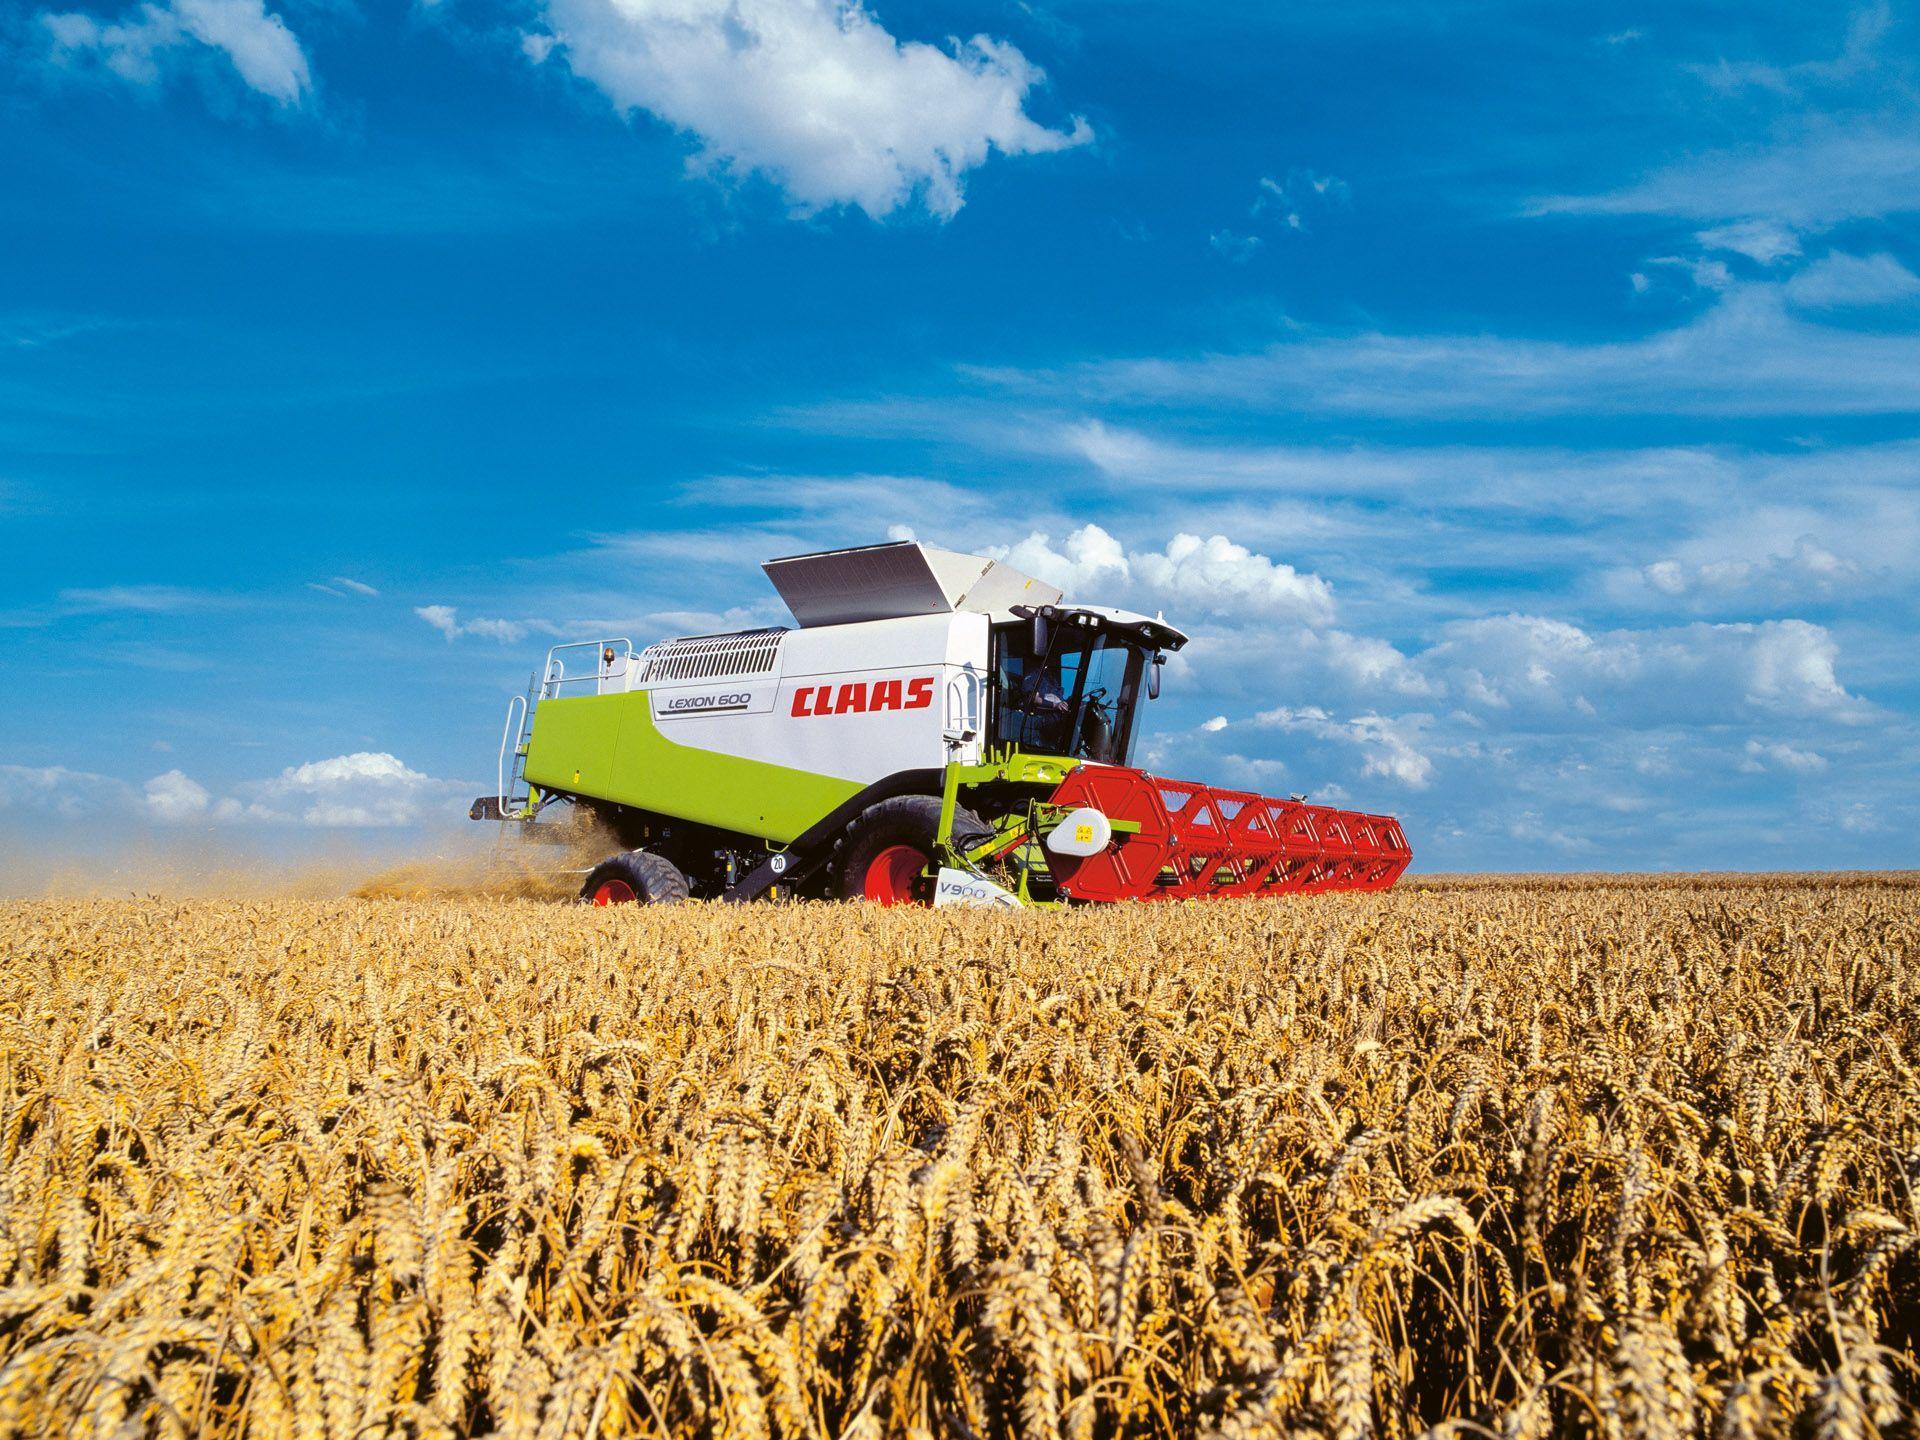 Claas Lexion picture # 54742. Claas photo gallery